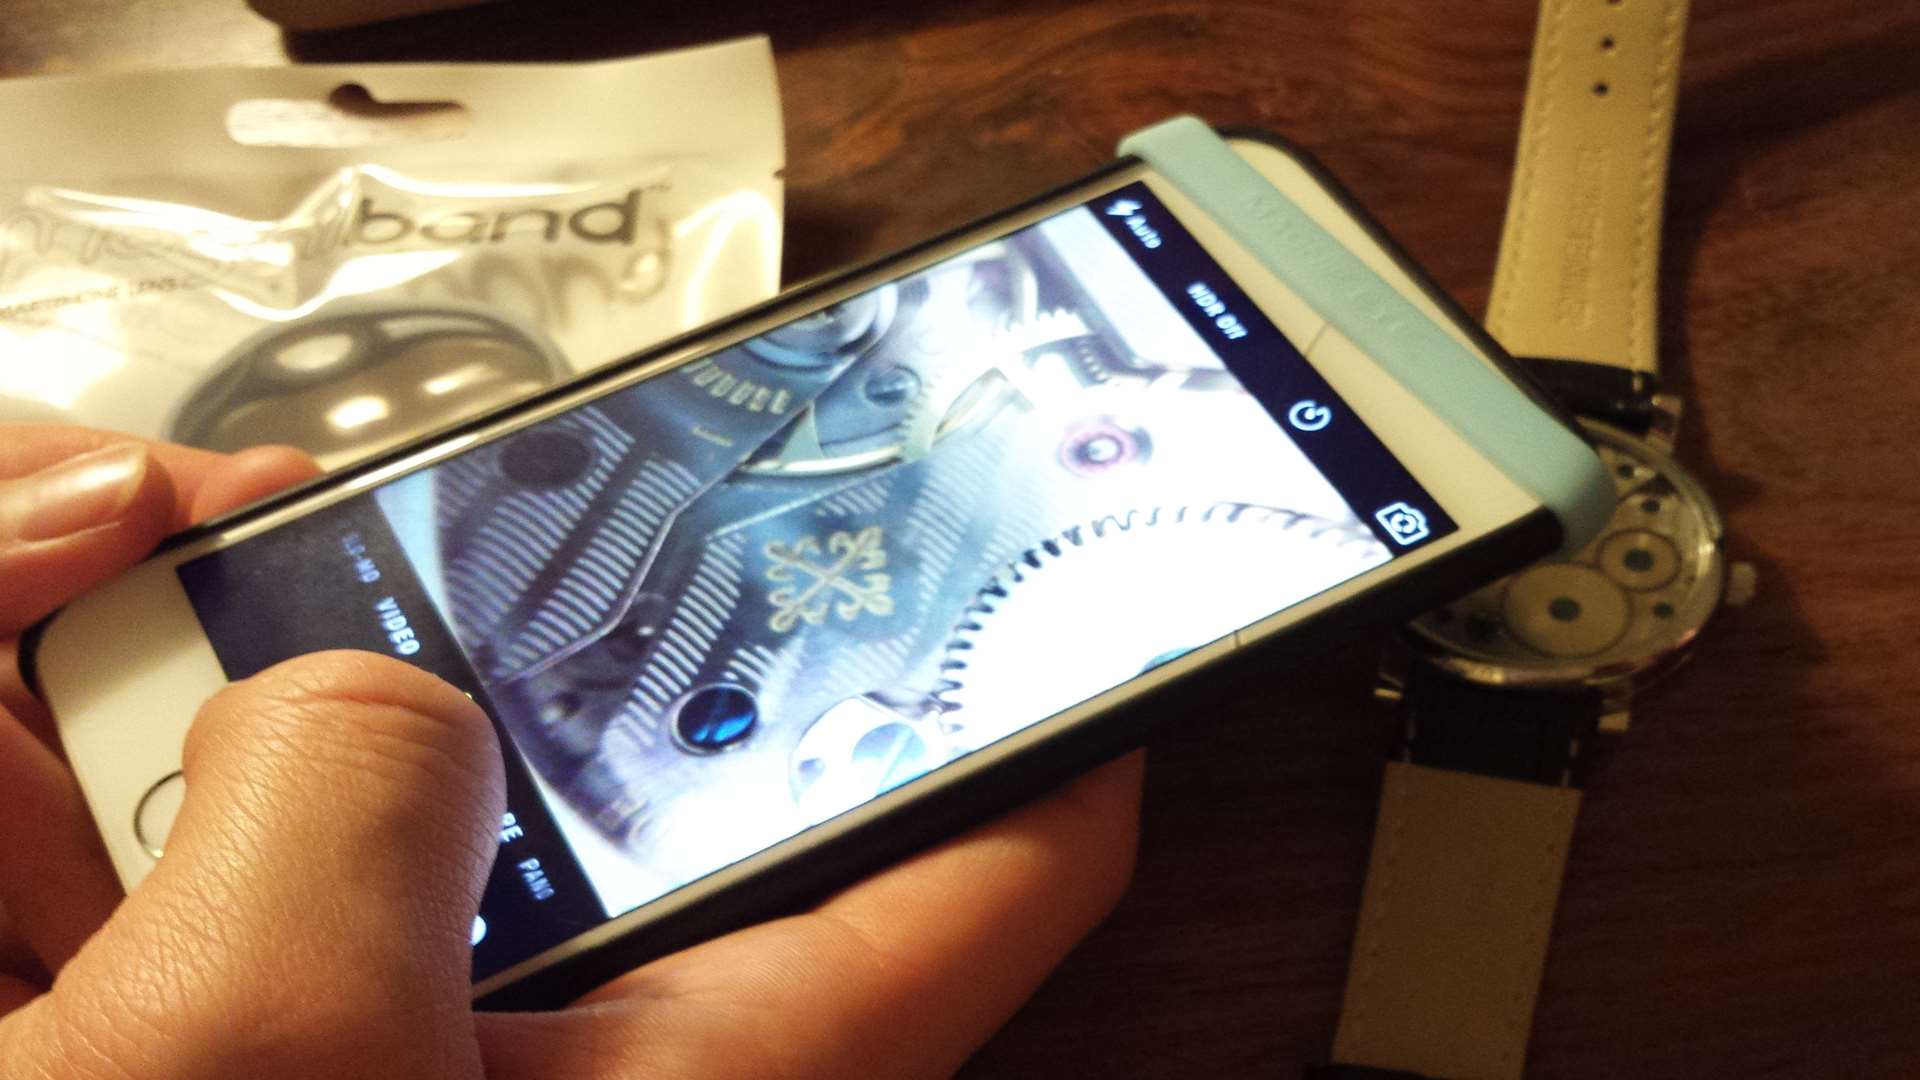 With the Magniband, the smartphones's ability to take close up photography is vastly improved